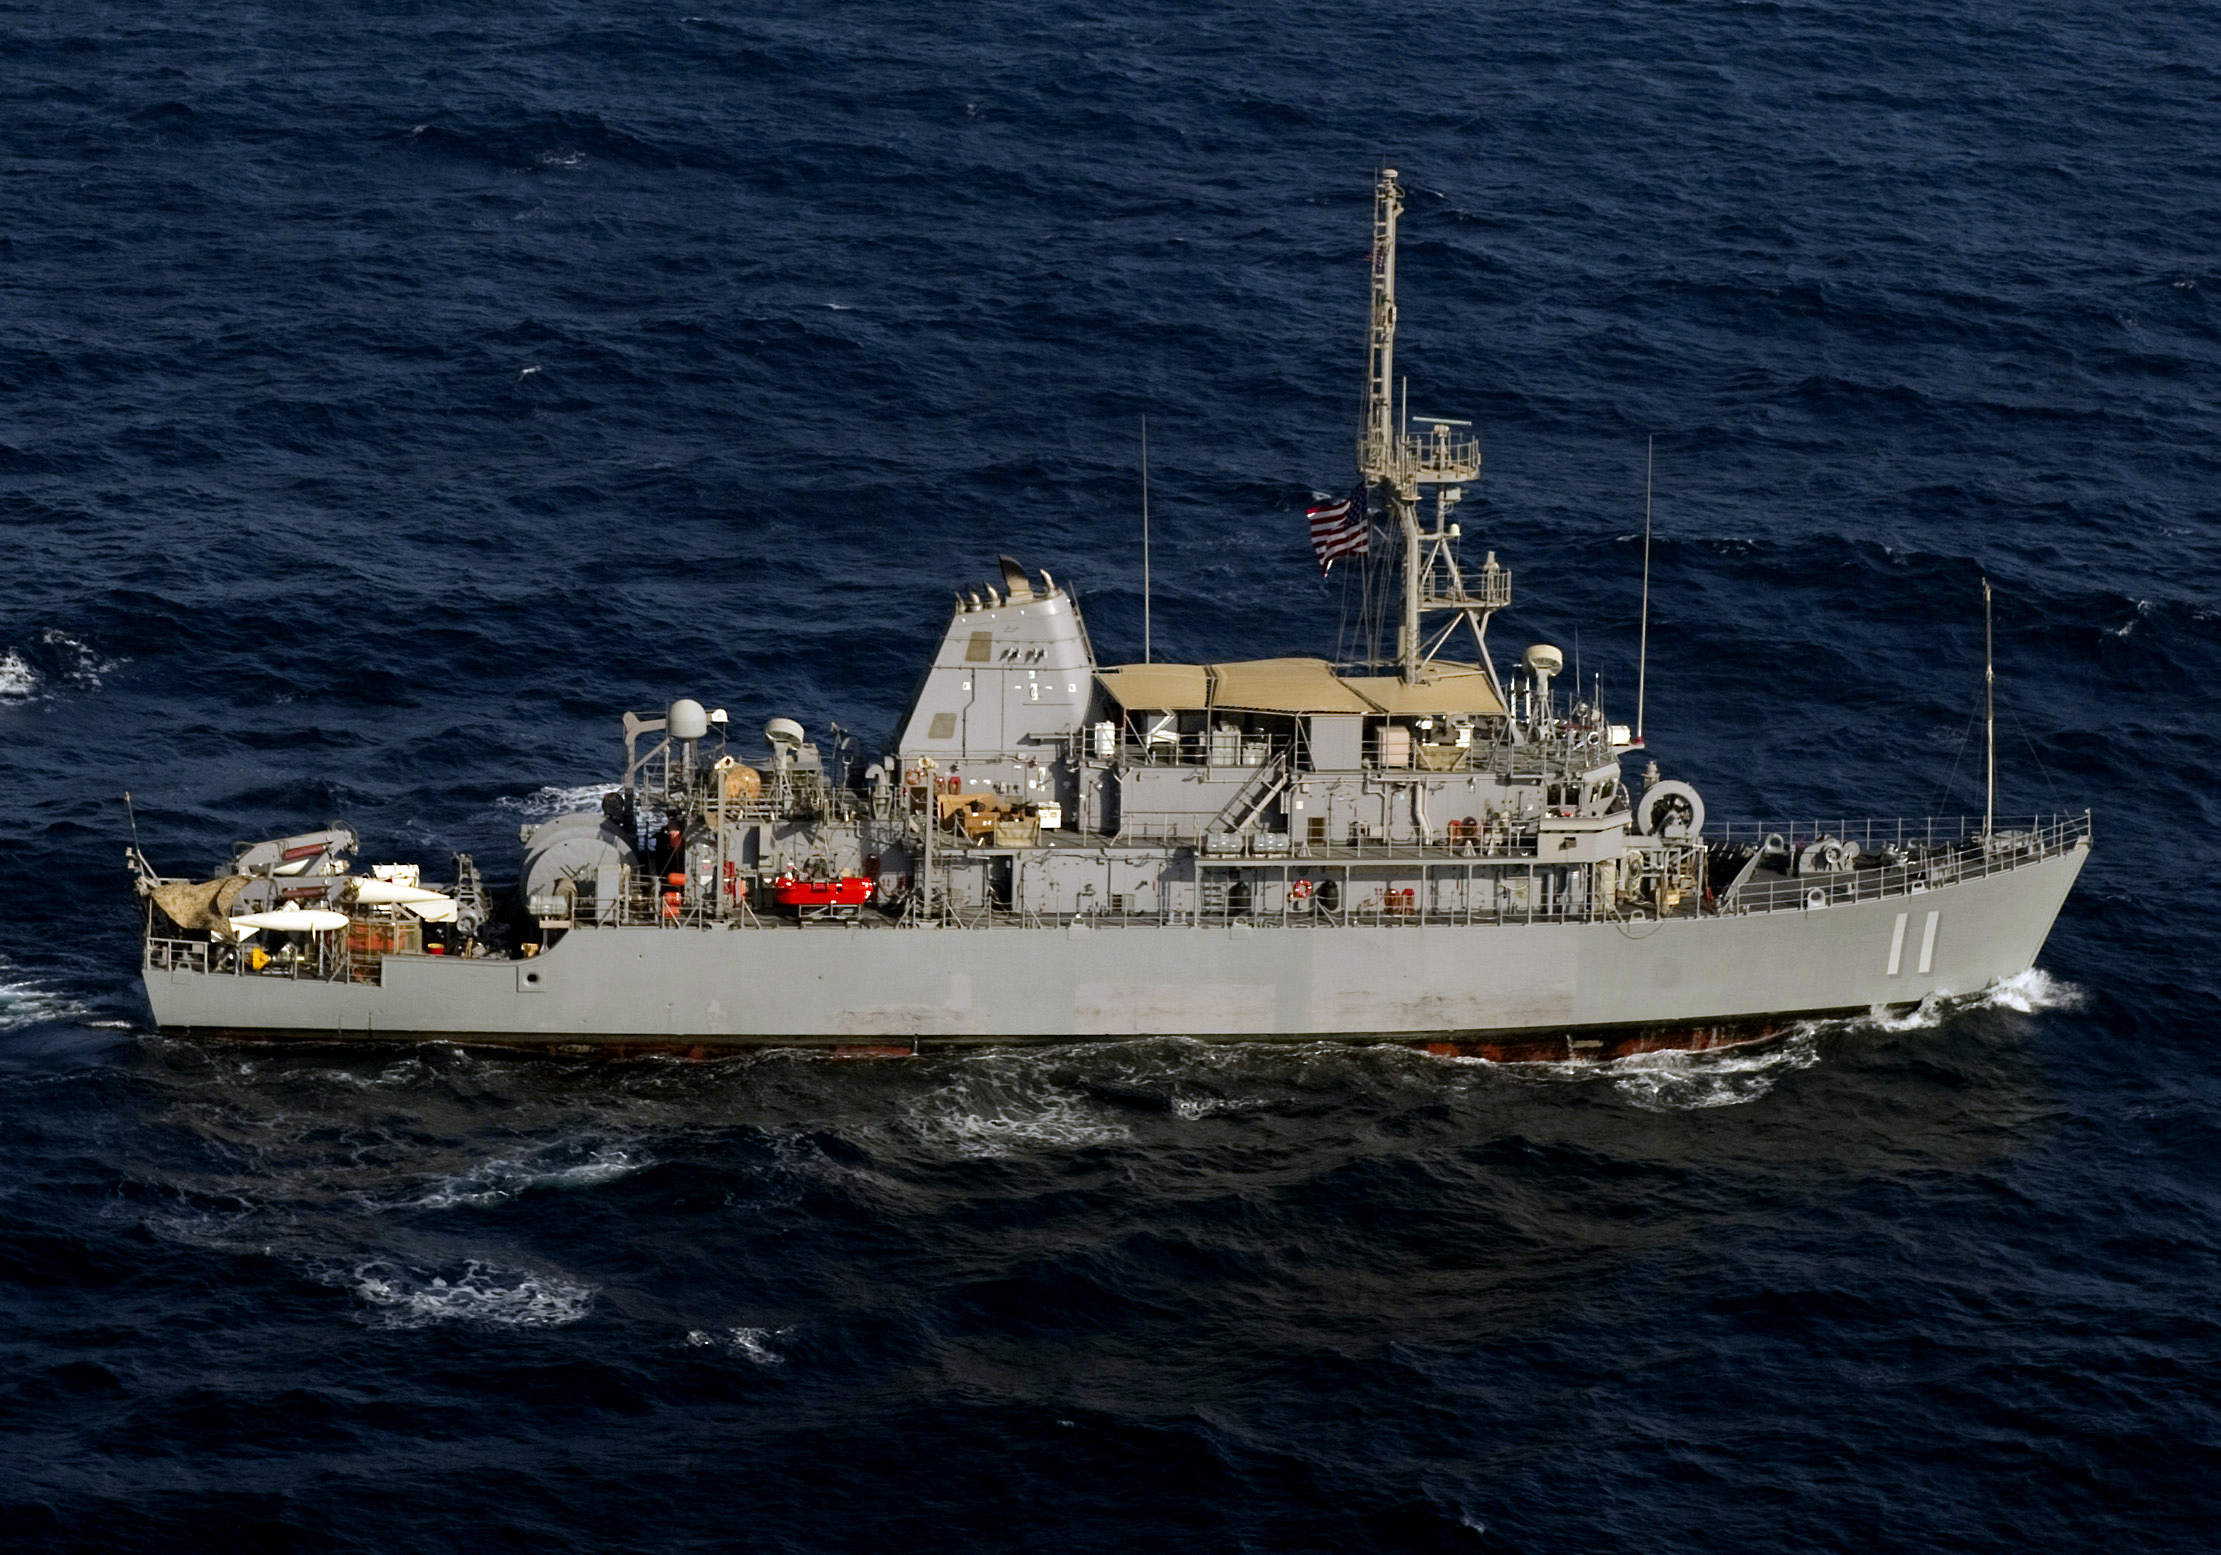 US_Navy_110816-N-YX920-134_The_mine_countermeasures_ship_USS_Gladiator_(MCM_11)_transits_the_Arabian_Gulf_during_a_bilateral_training_exercise_to_i.jpg